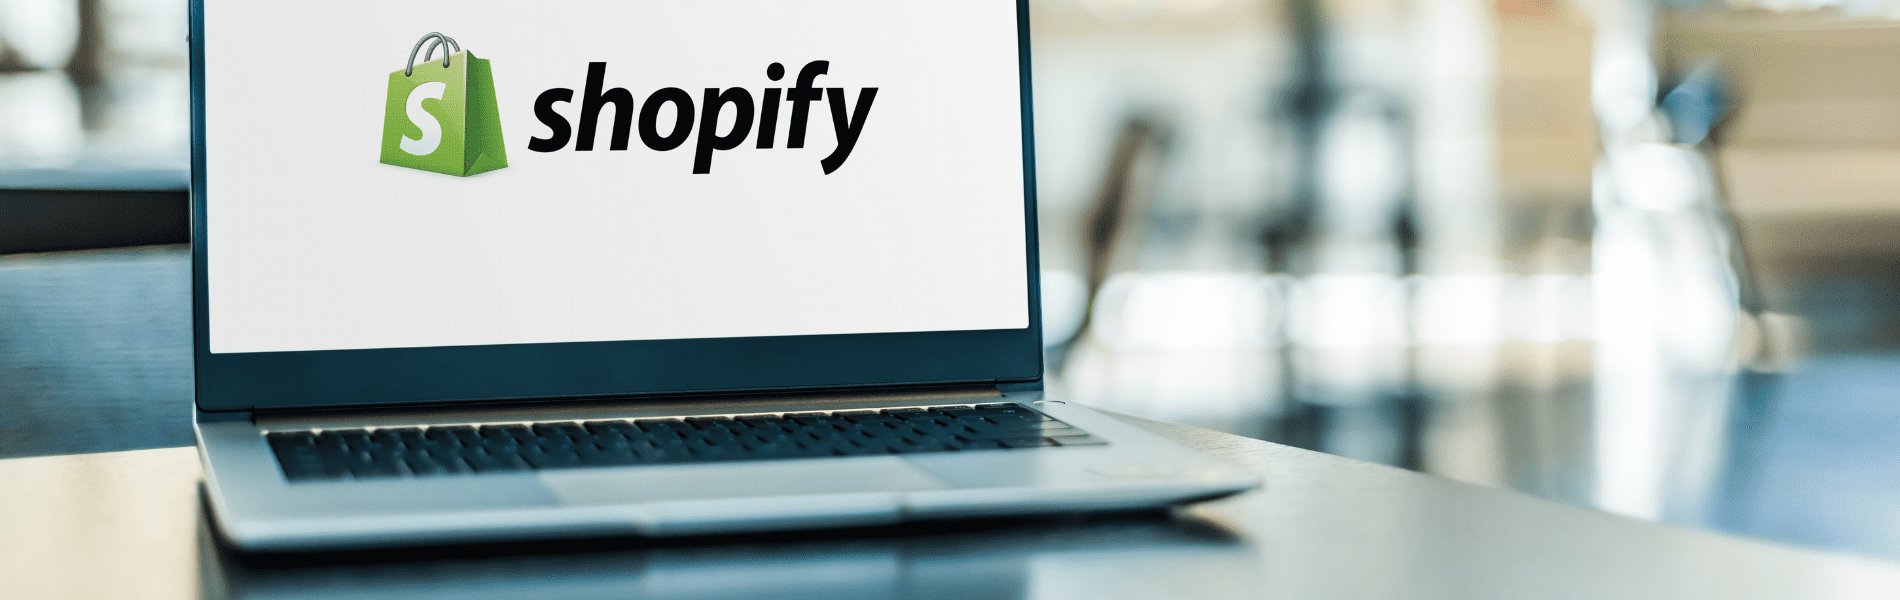 expert shopify tips